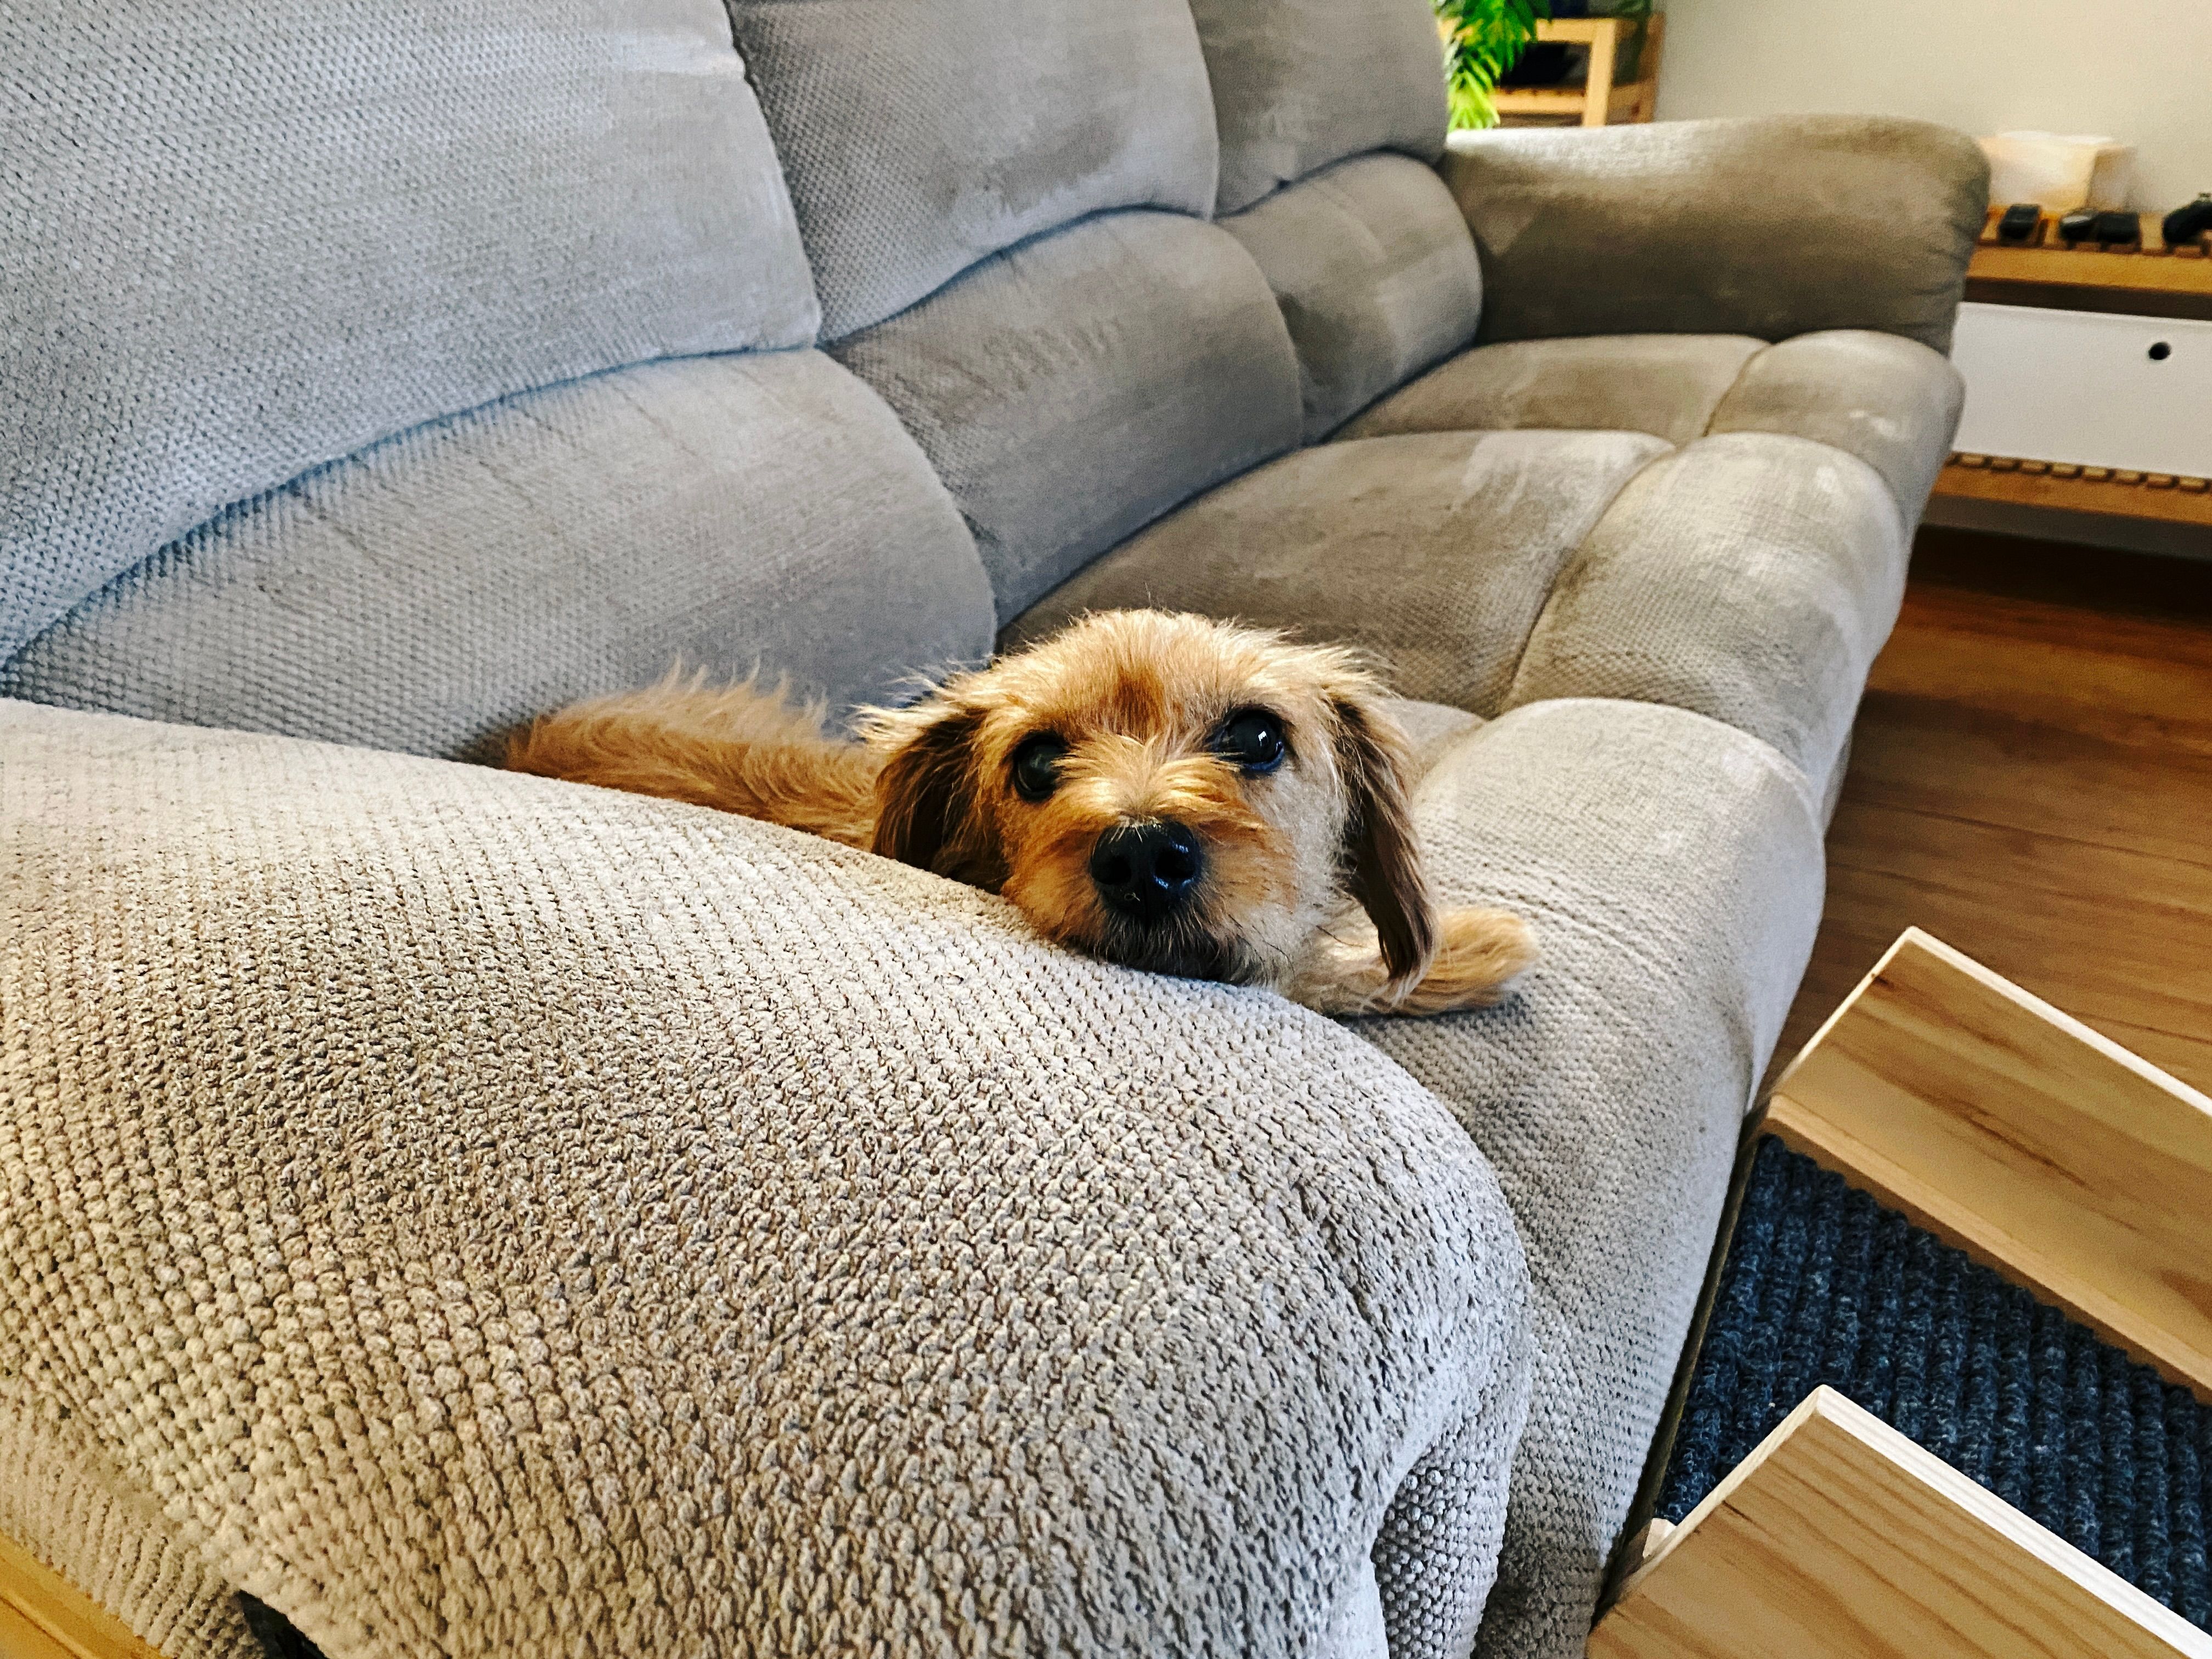 A photo of a small scruffy blonde dog lying on a tan-coloured lounge with his head up on the arm of the lounge, looking directly at the camera.